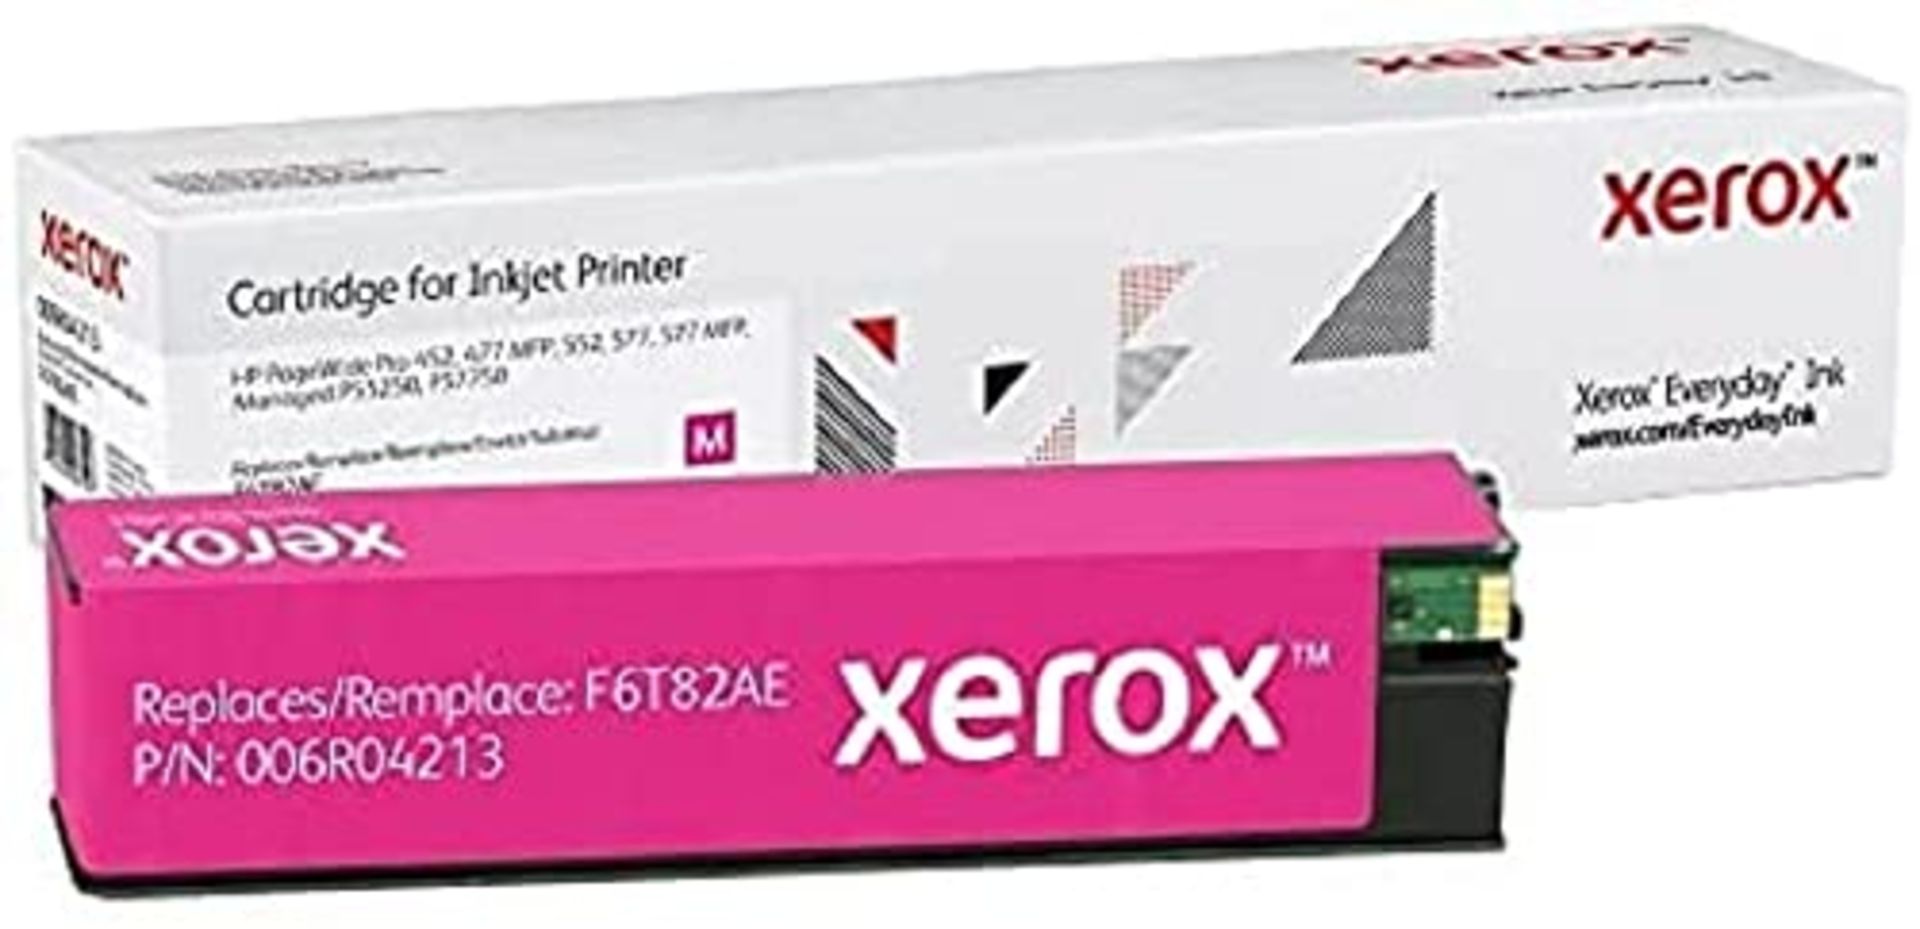 Everyday by Xerox Magenta Cartridge compatible with HP 973X (F6T82AE), High Capacity